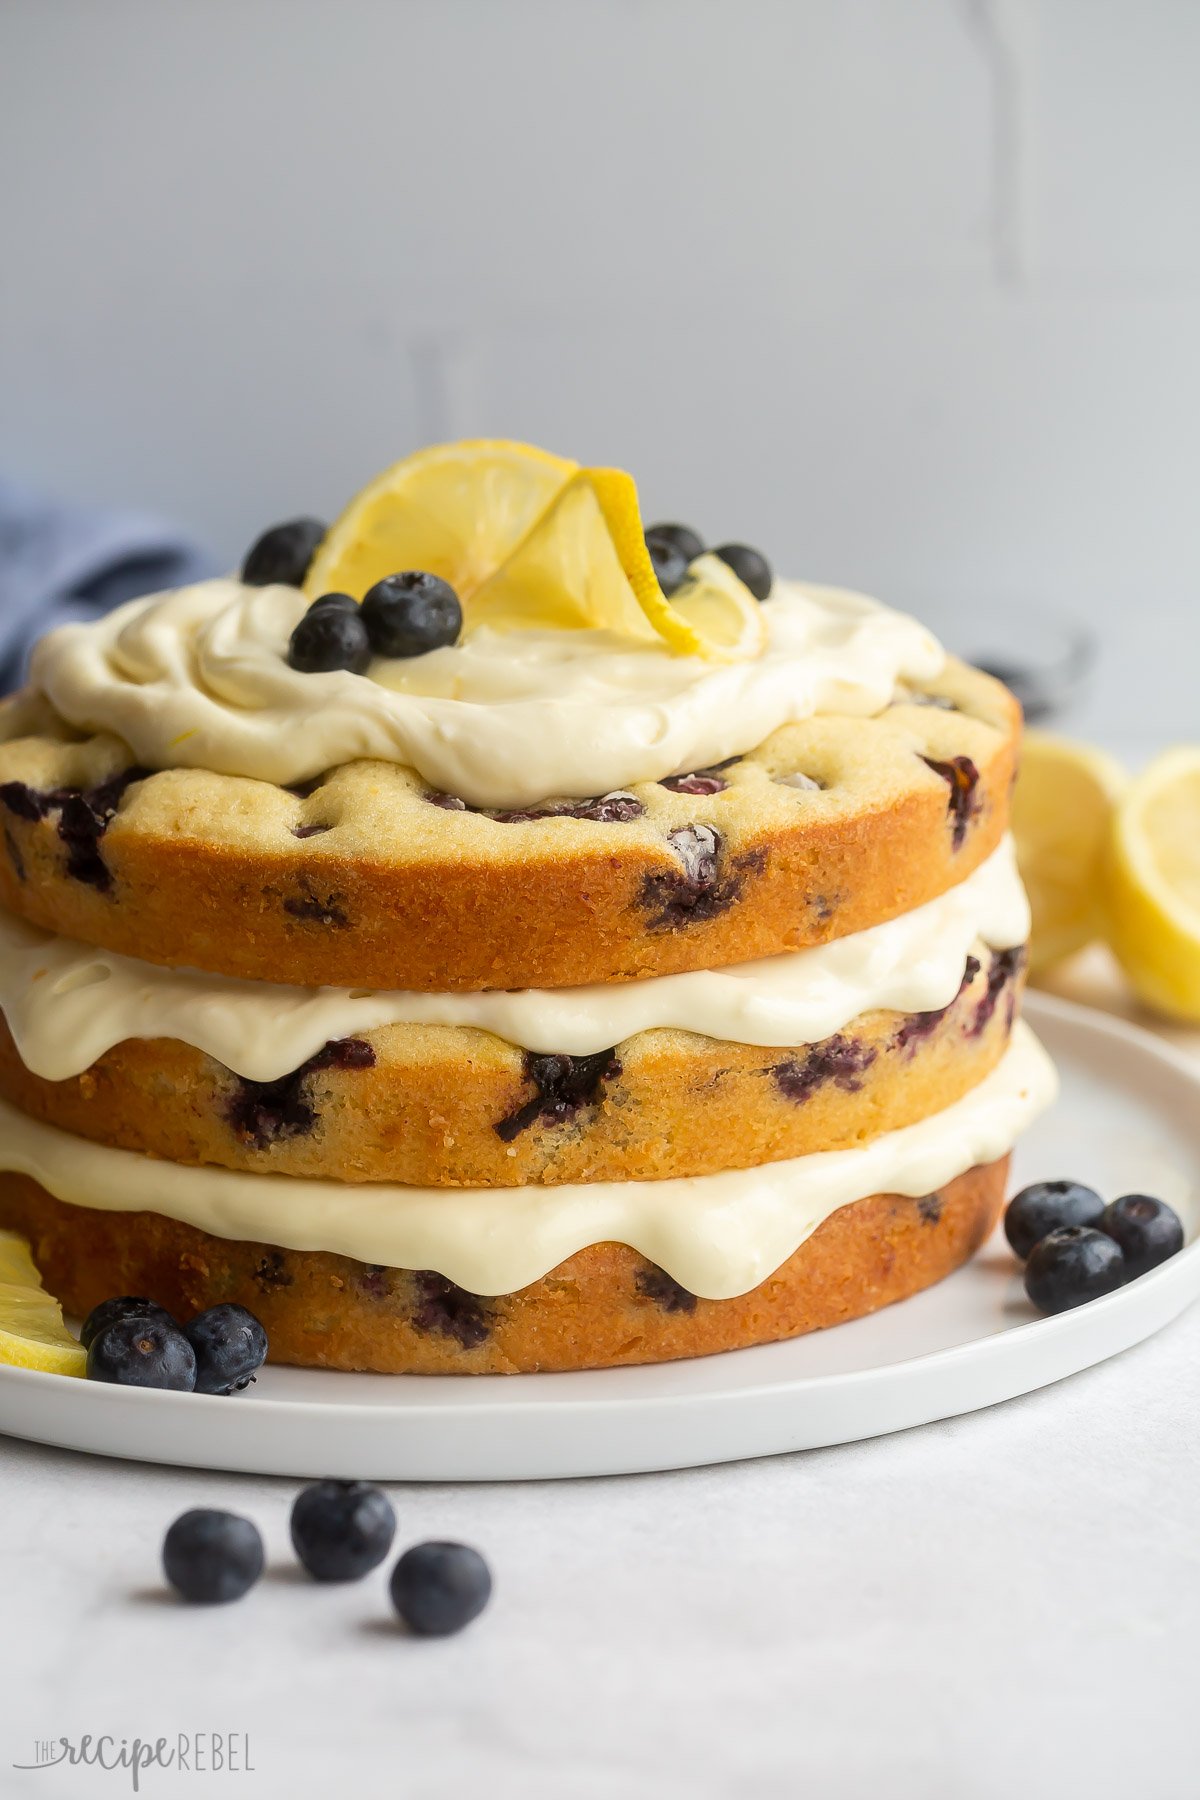 Side view of decorated lemon blueberry cake topped with lemon slices and blueberries.